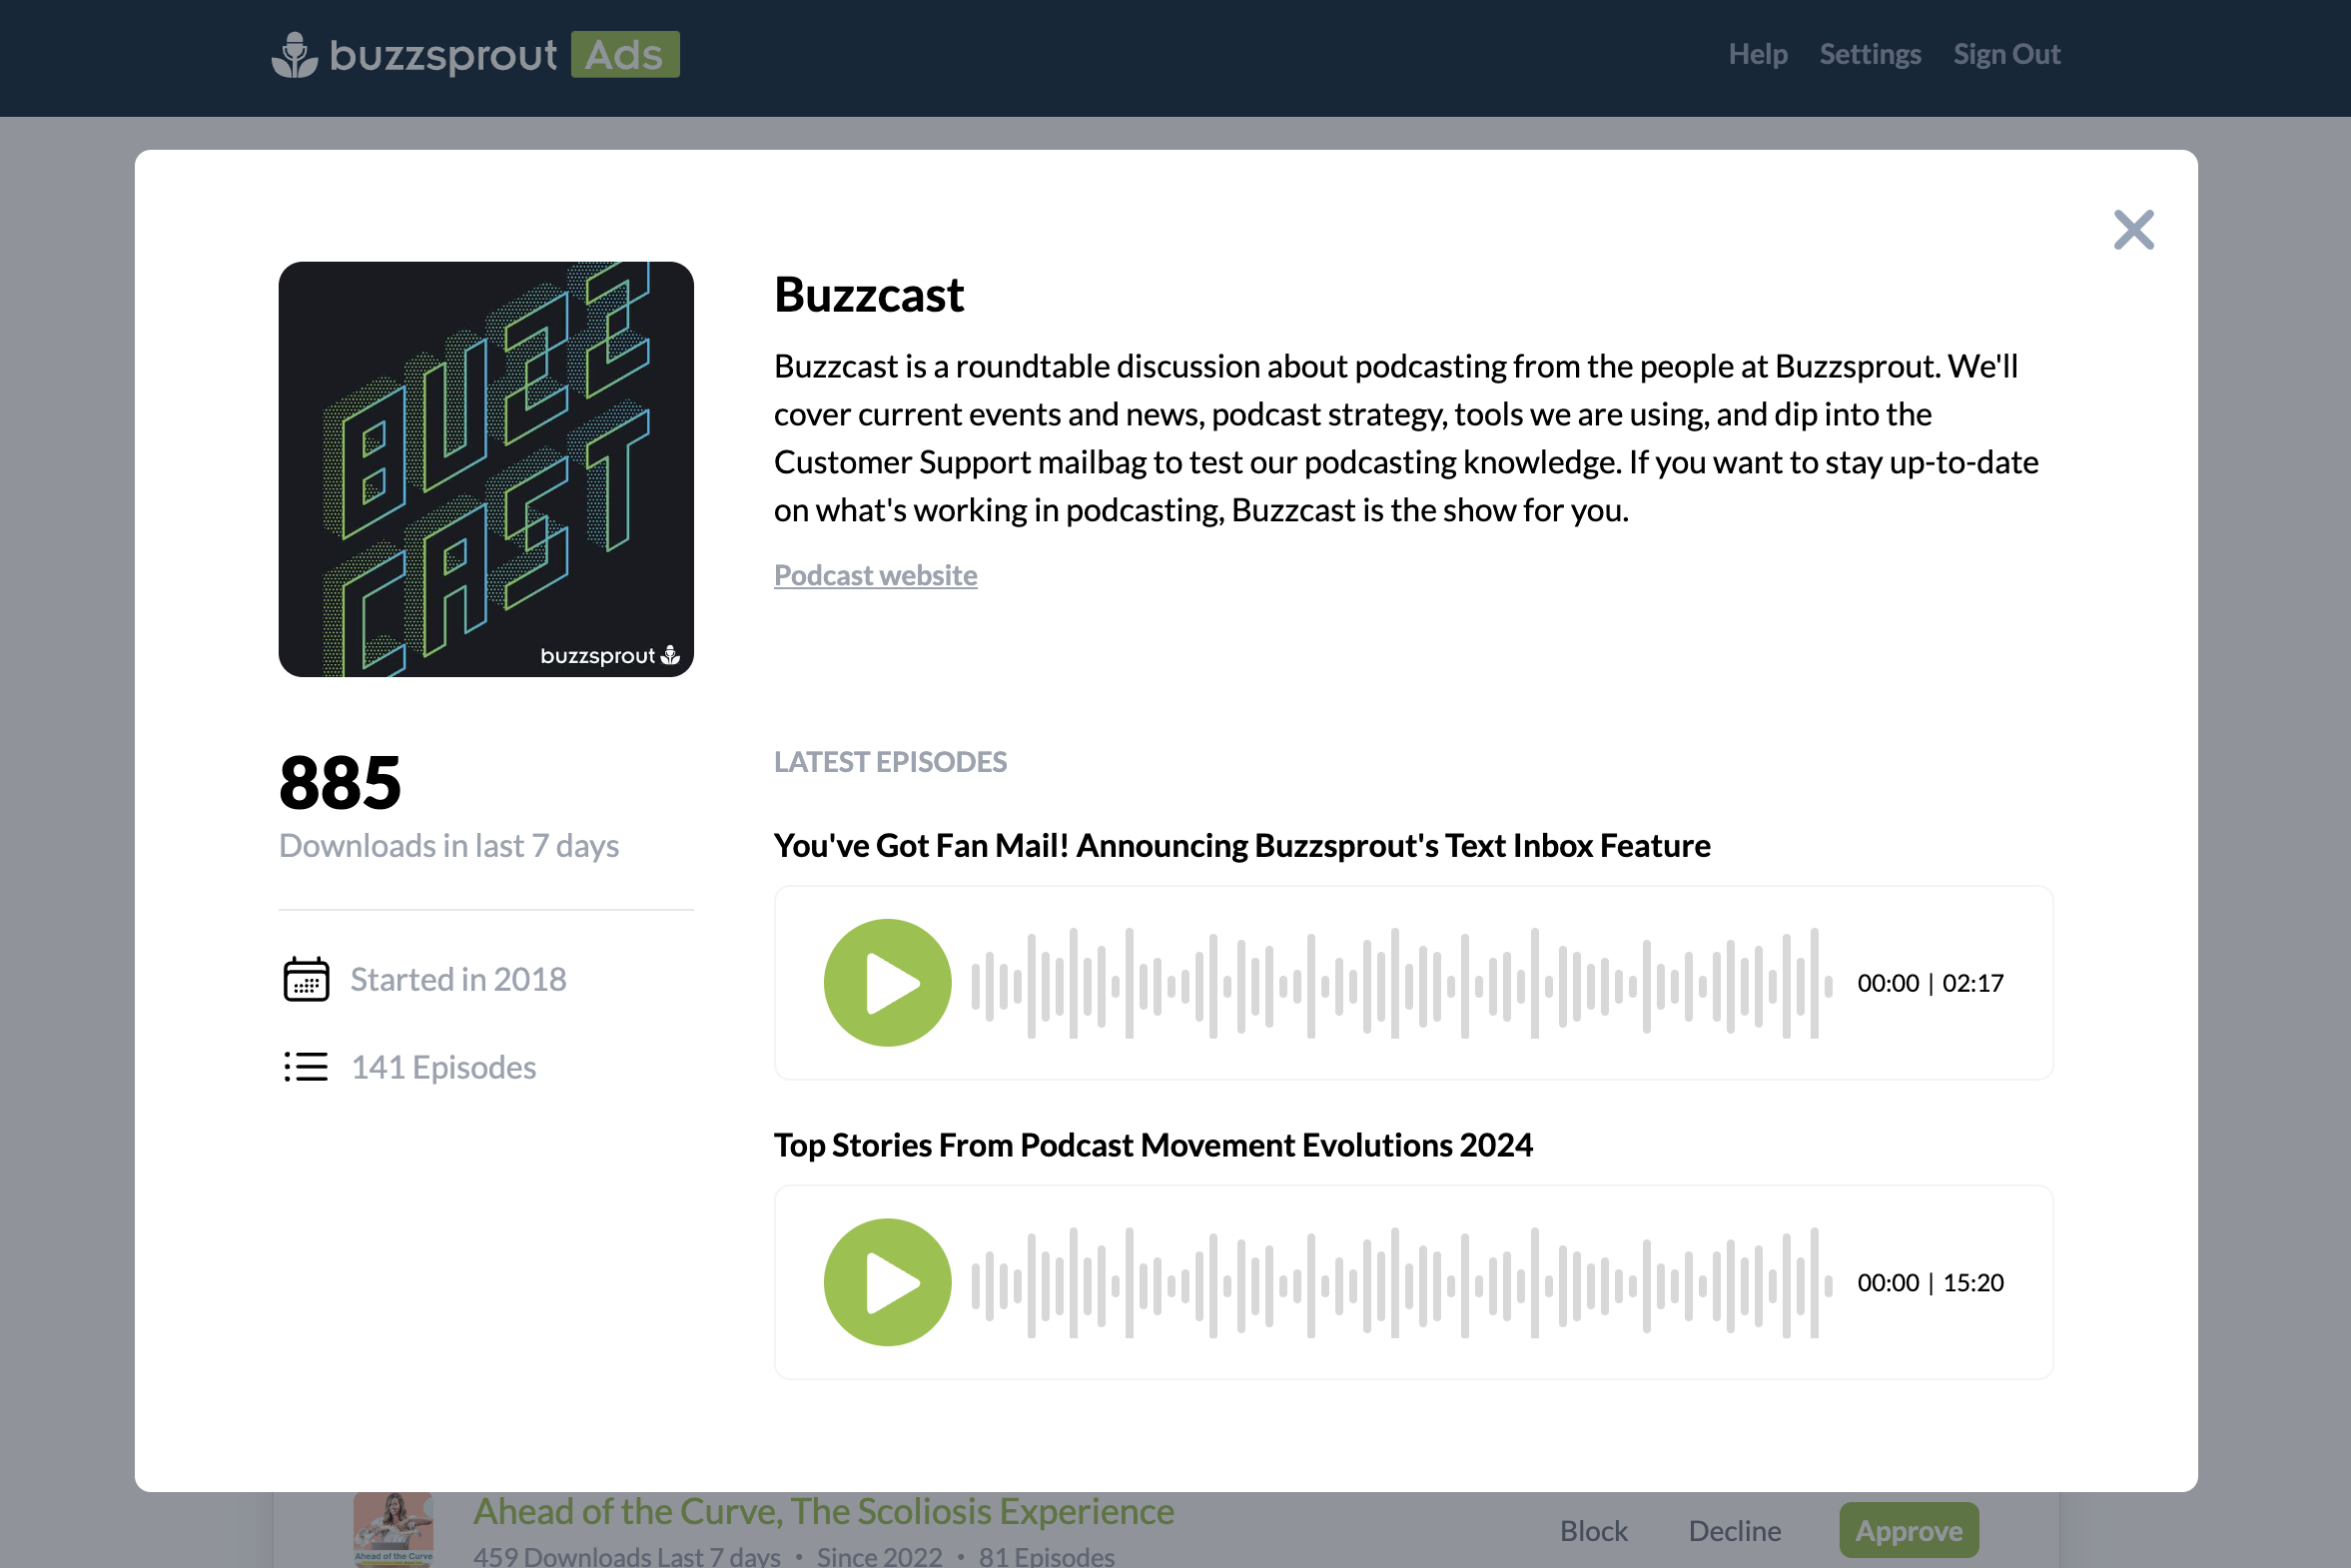 Vetting a single podcast in Buzzsprout Ads